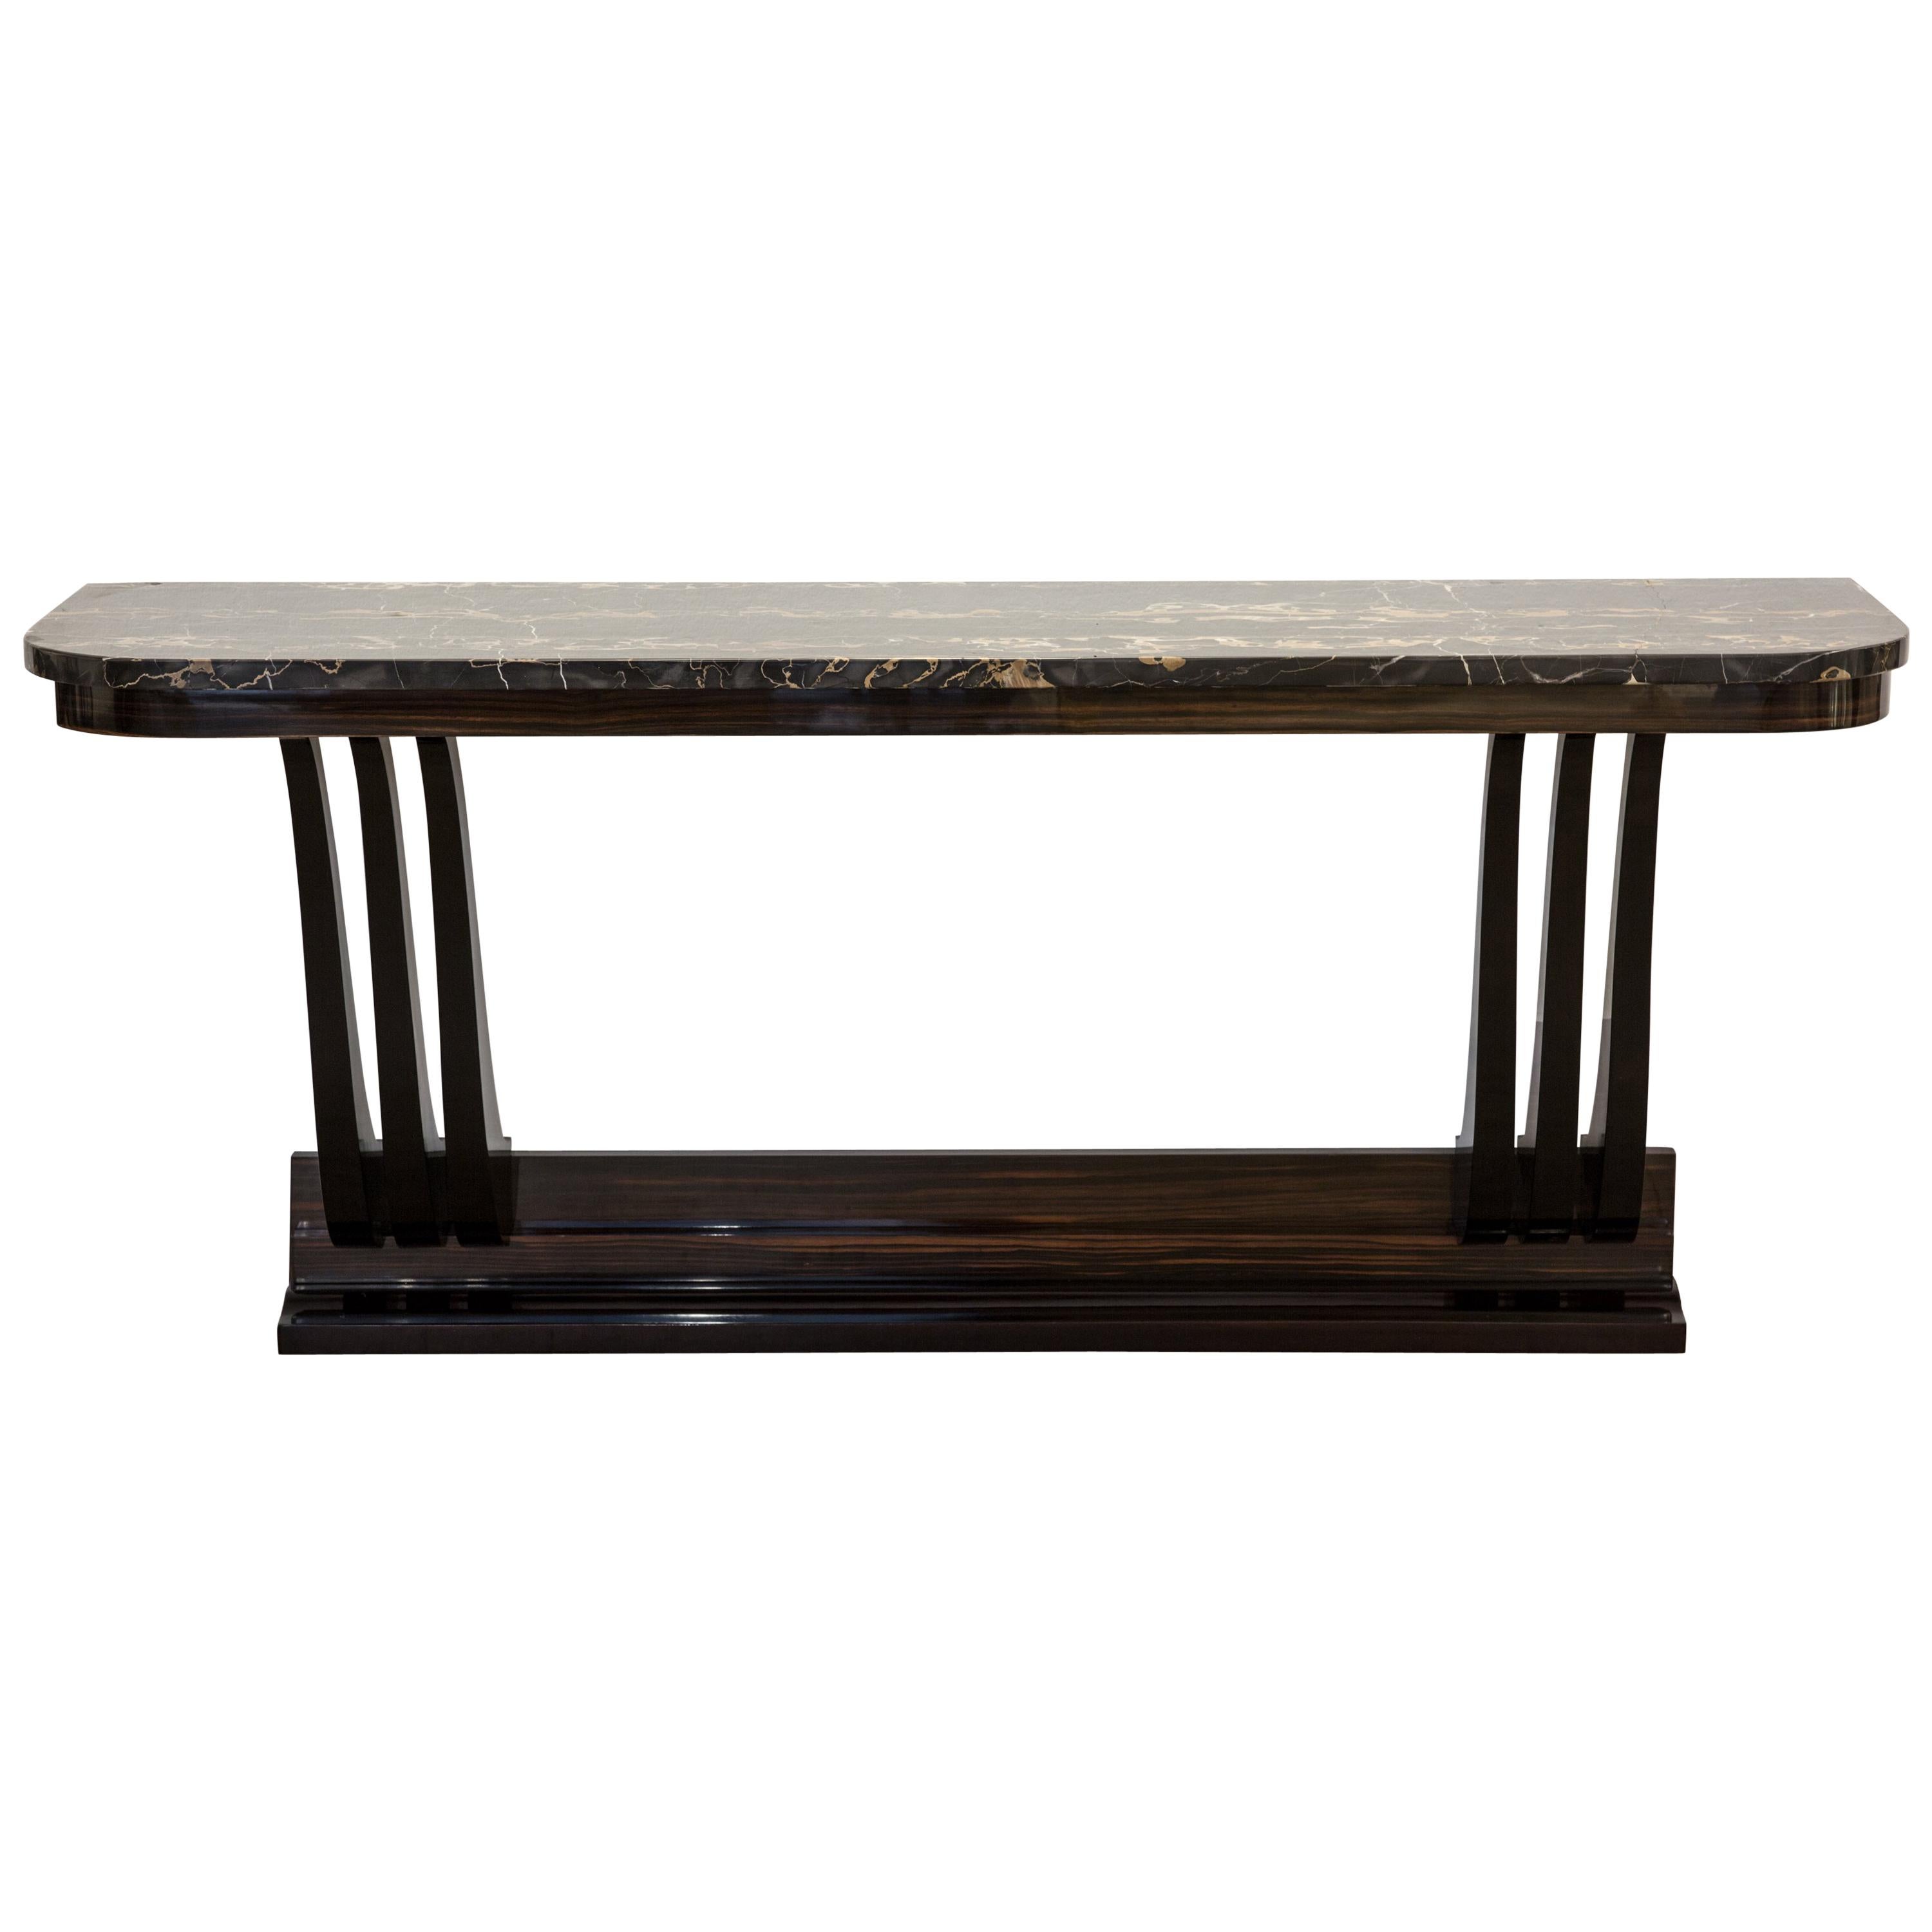 Antique French Art Deco Console Table with Original Marble Top from 1930 For Sale